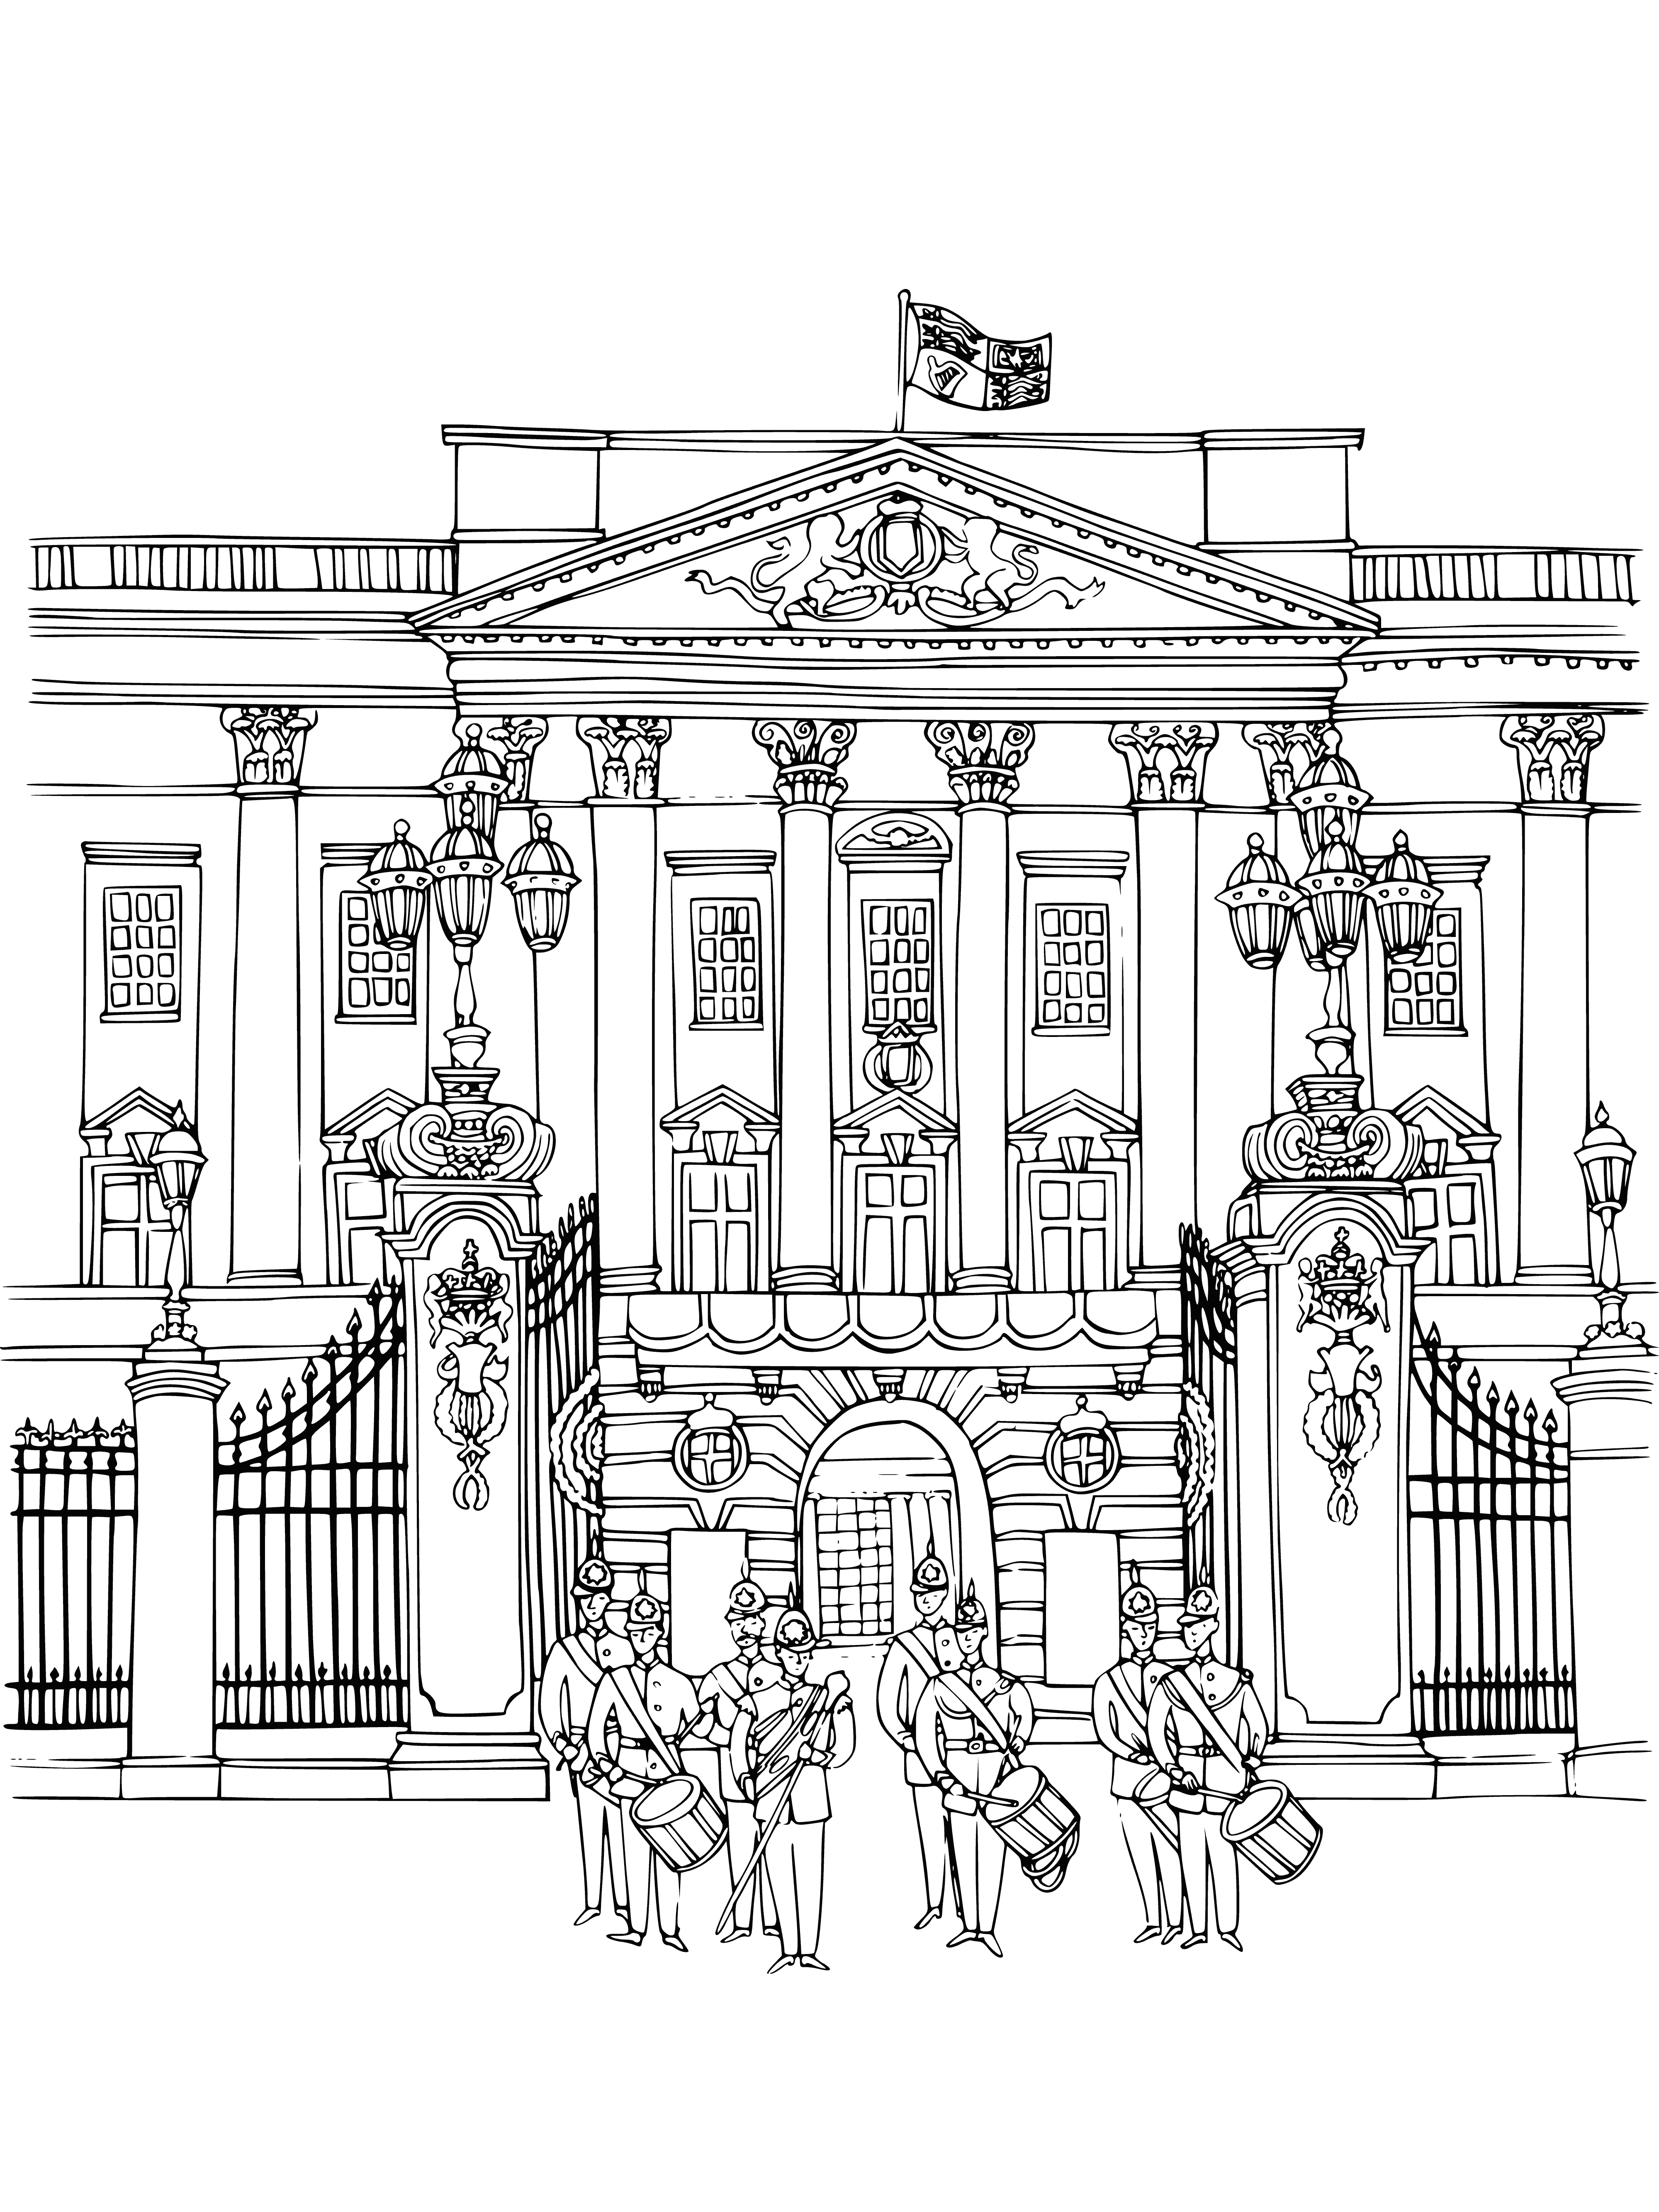 Buckingham Palace in London. England coloring page